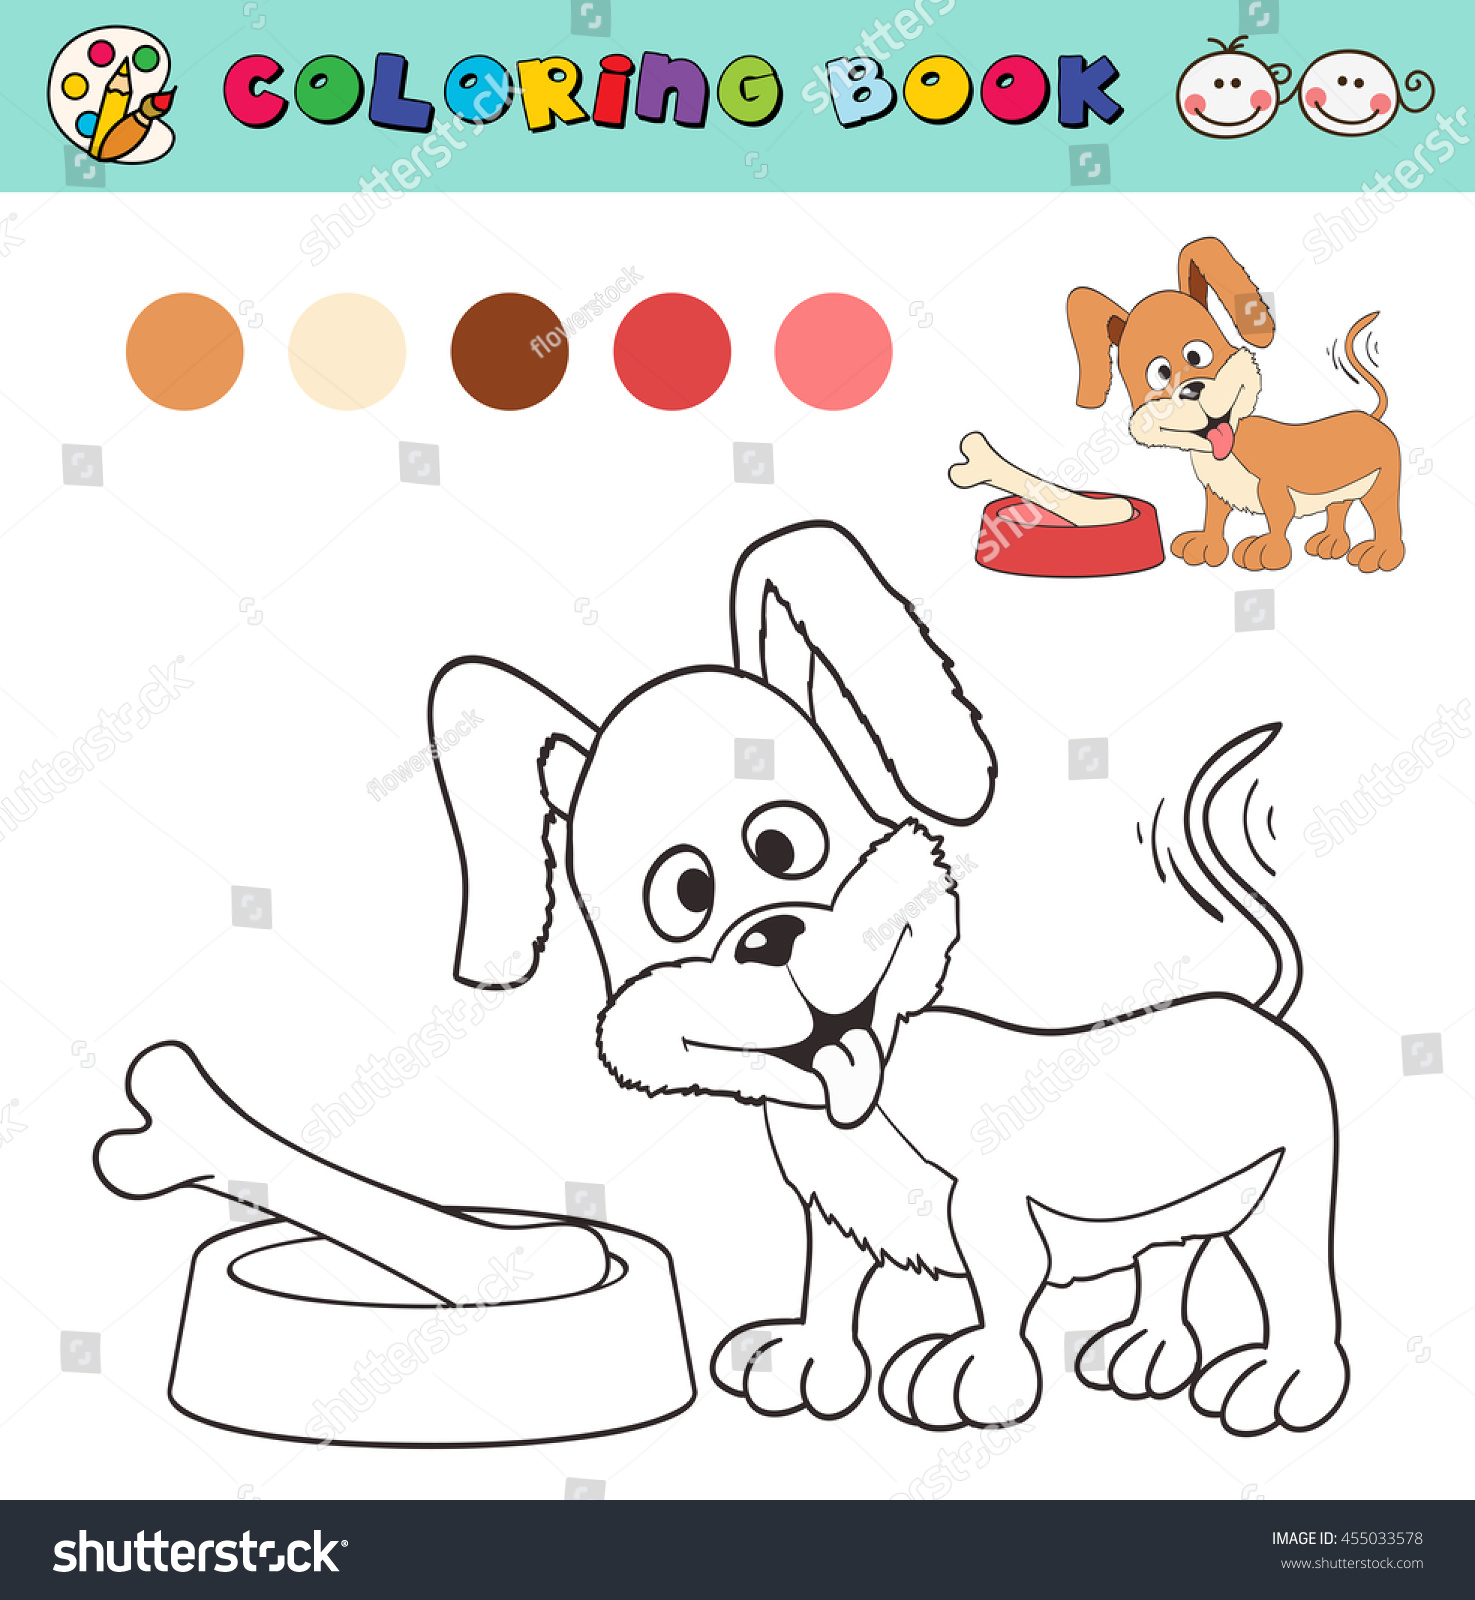 Coloring book page template dog bone stock vector royalty free